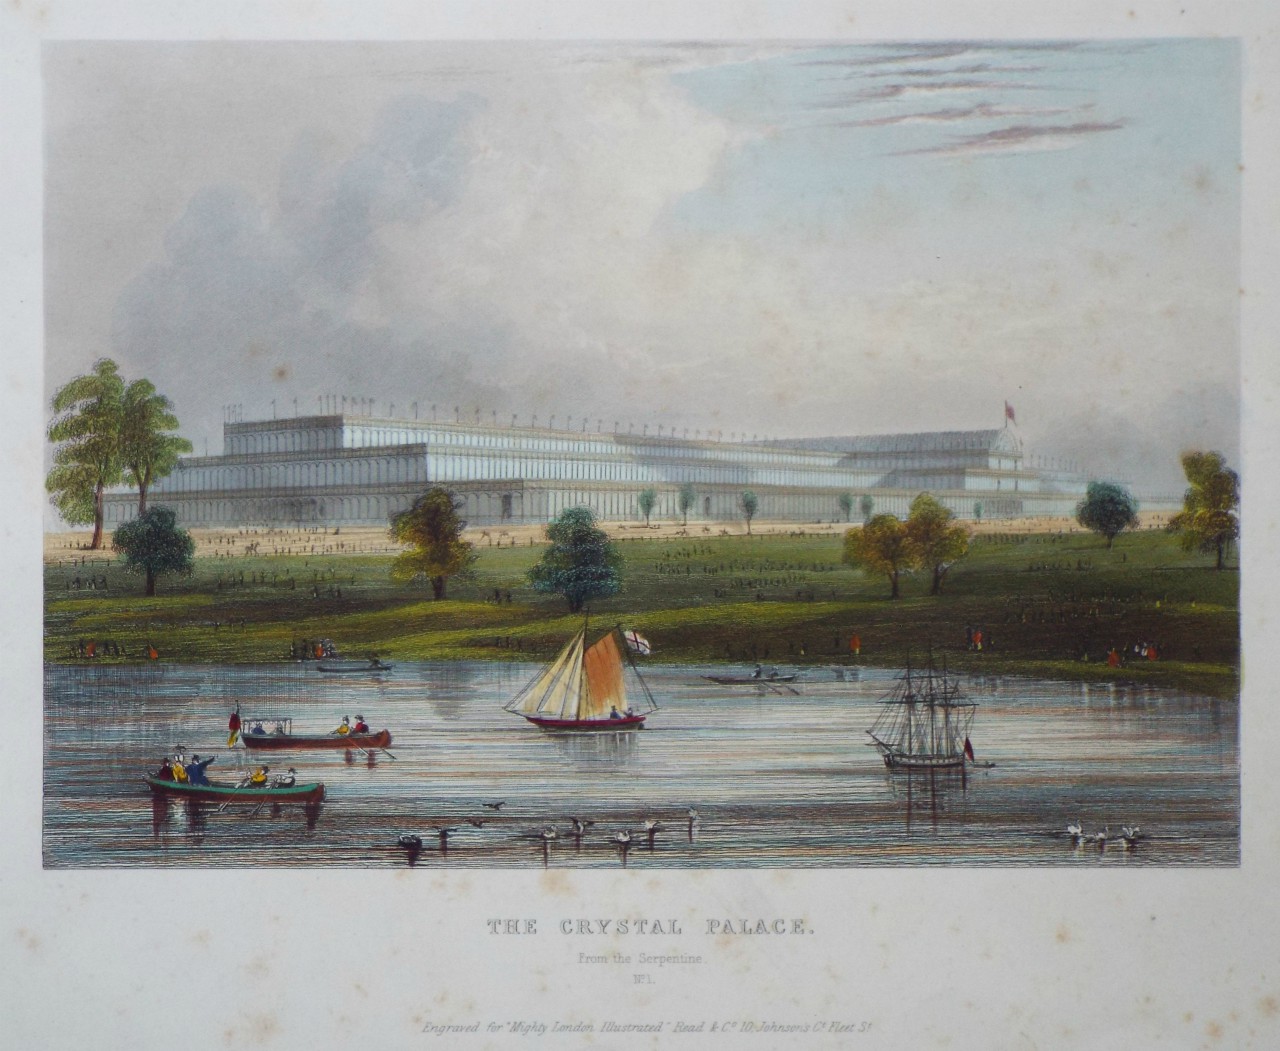 Print - The.Crystal Palace. Front the Serpentine. No.1.